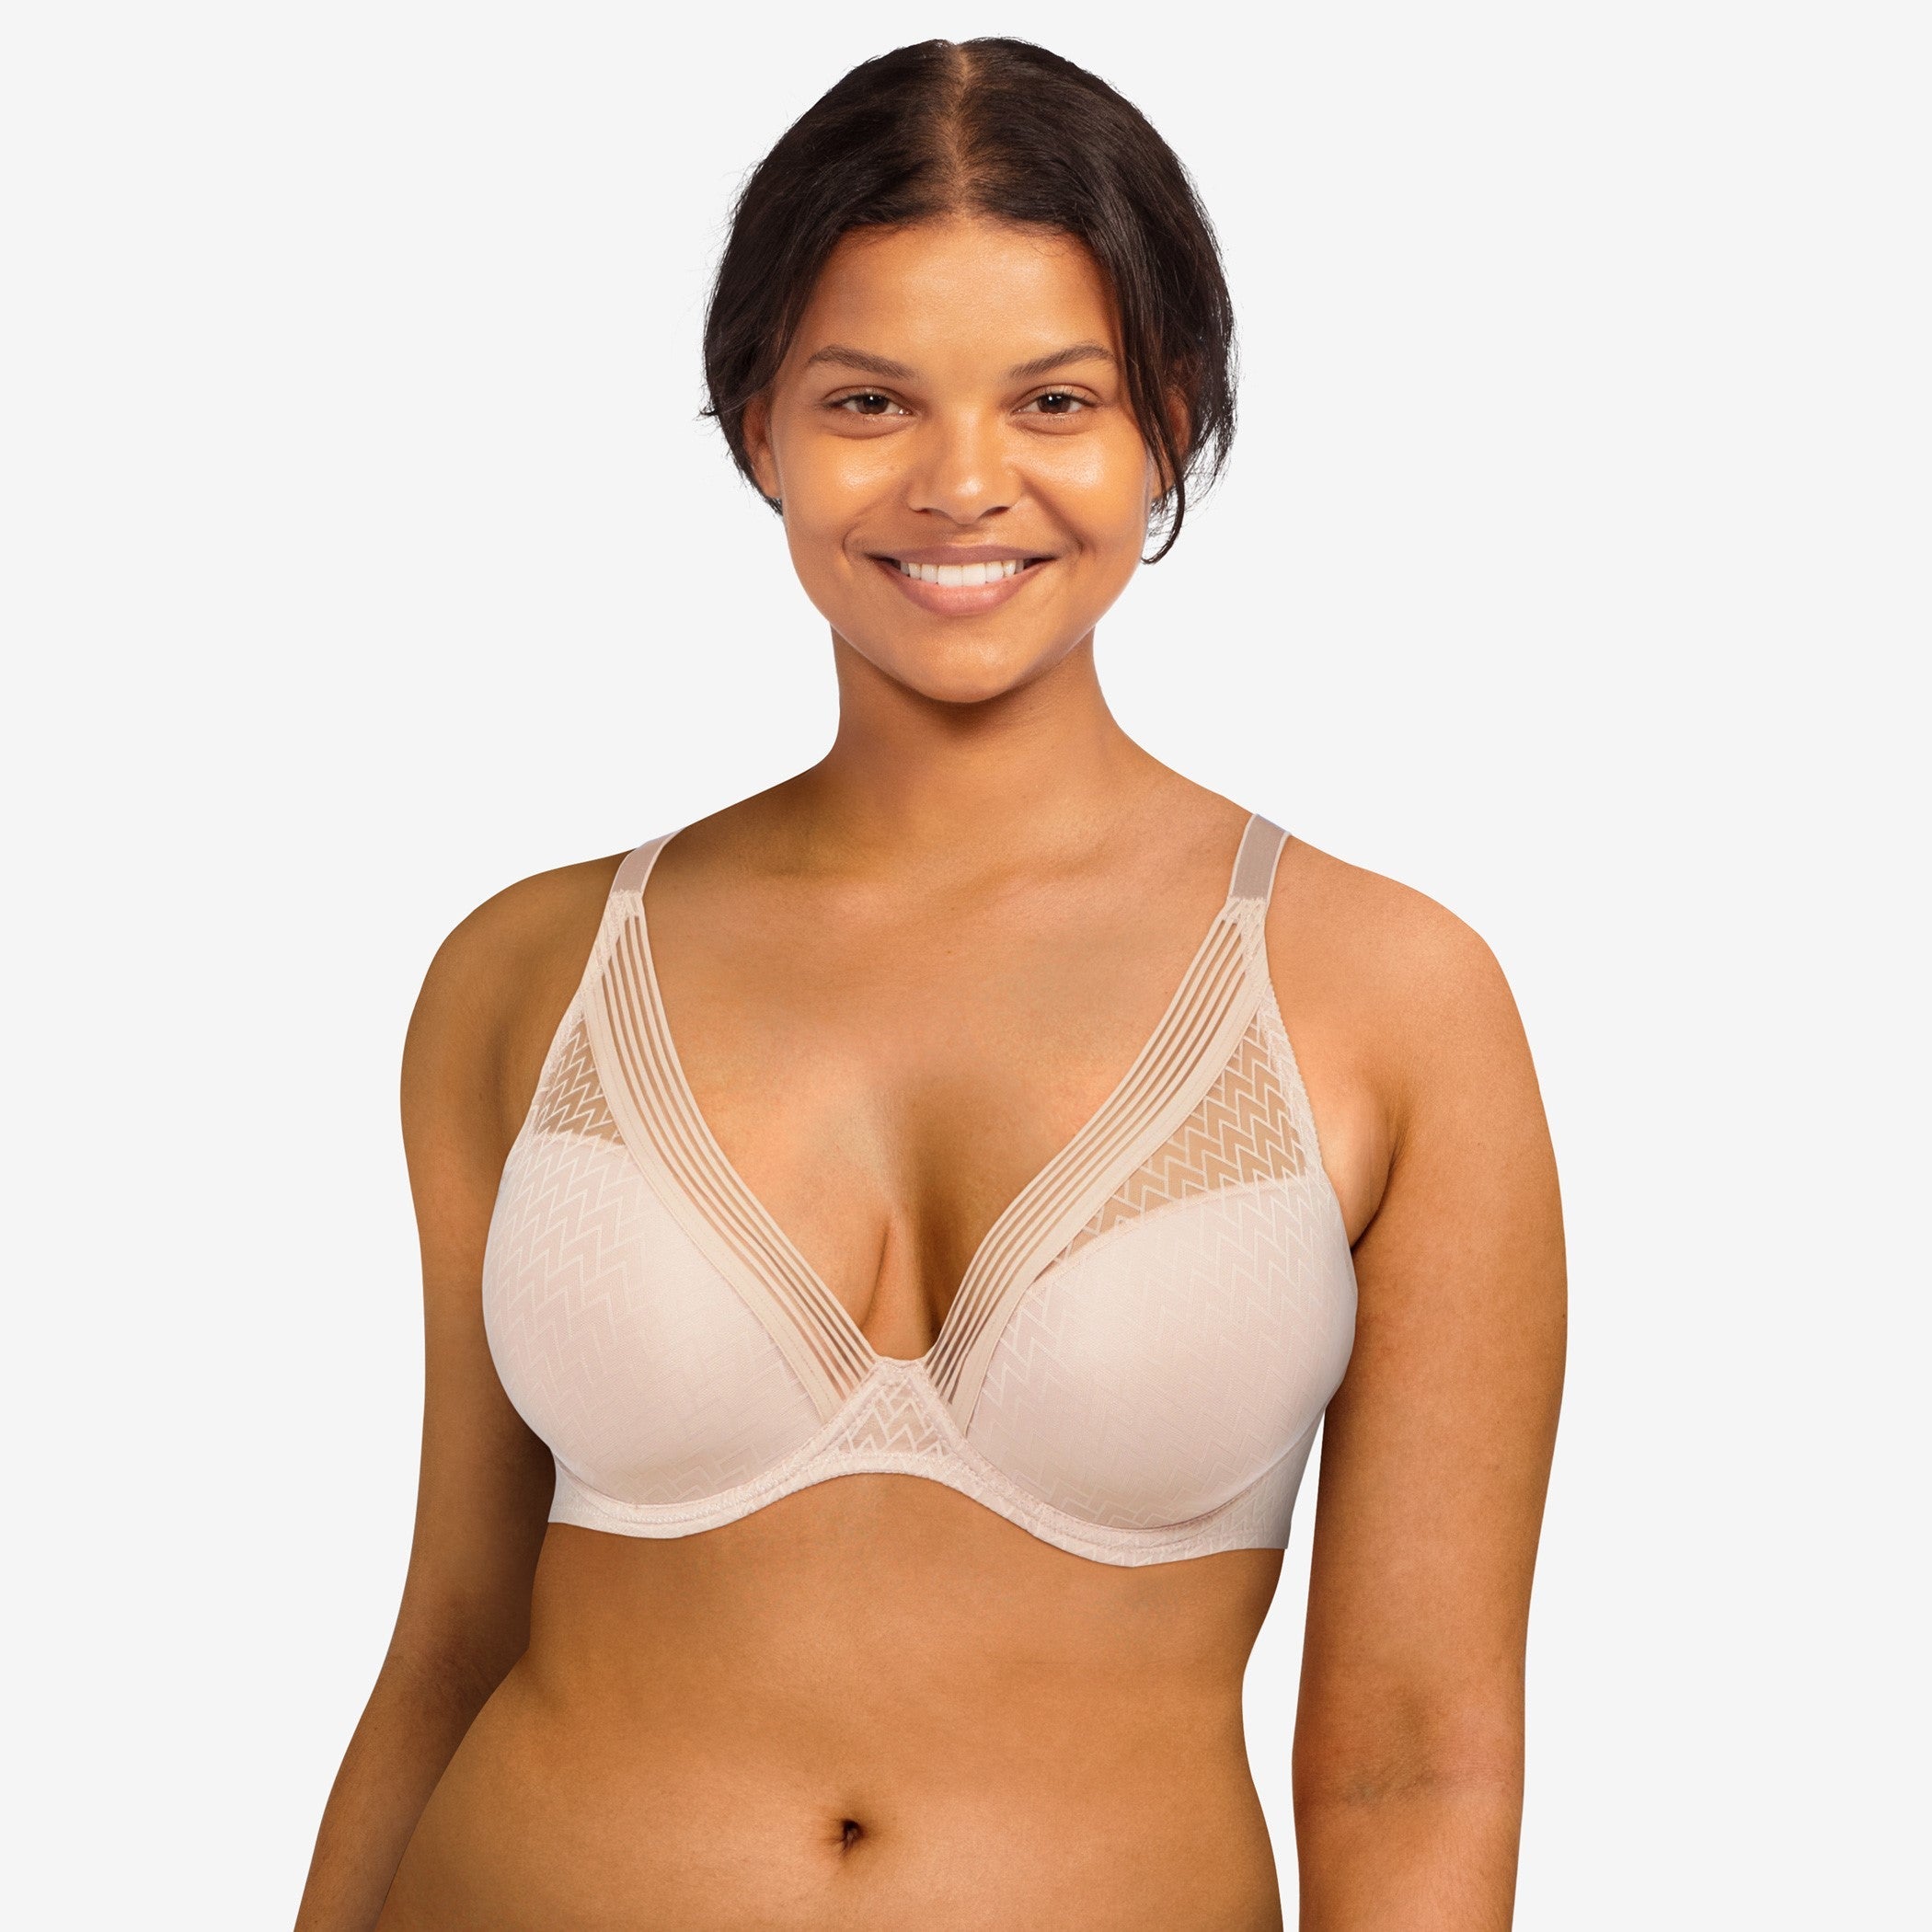 Chantelle - Day to Night - Lace Underwire Bra - Sale